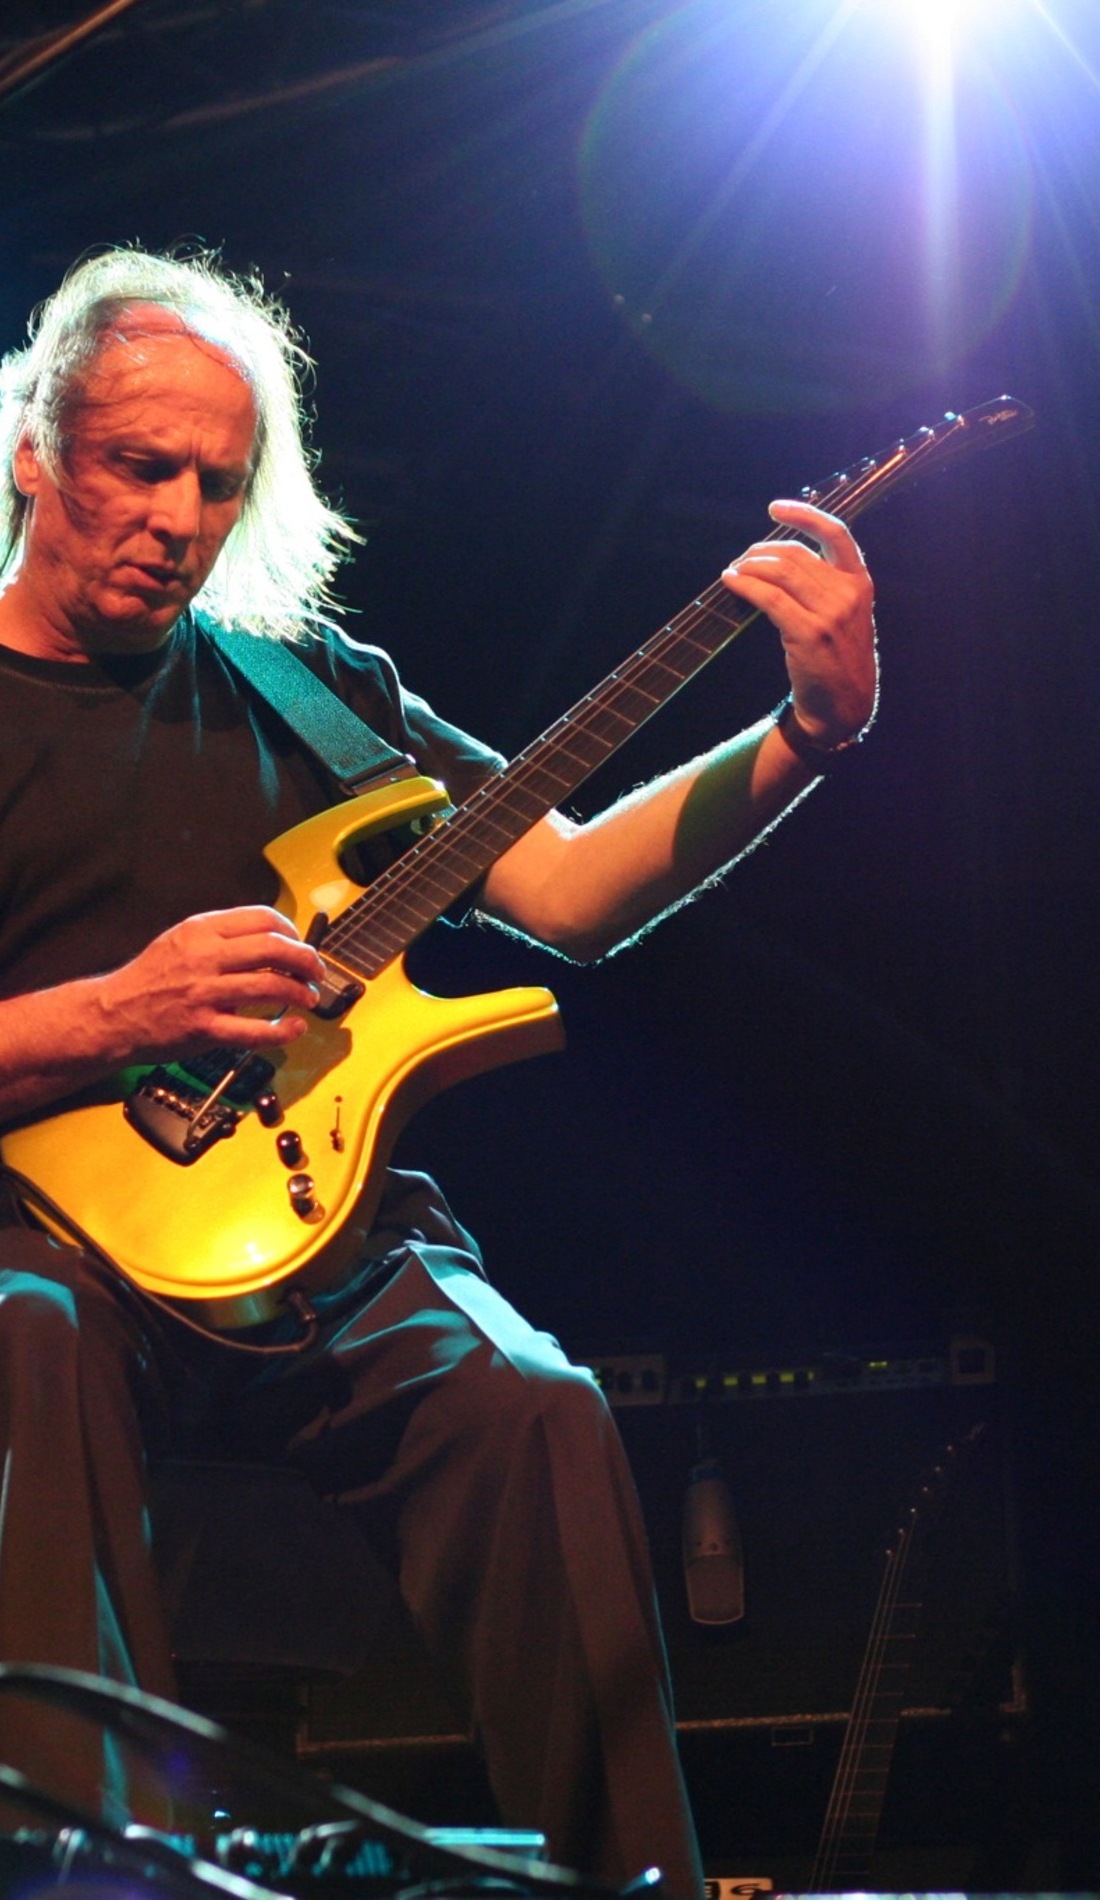 A Adrian Belew live event